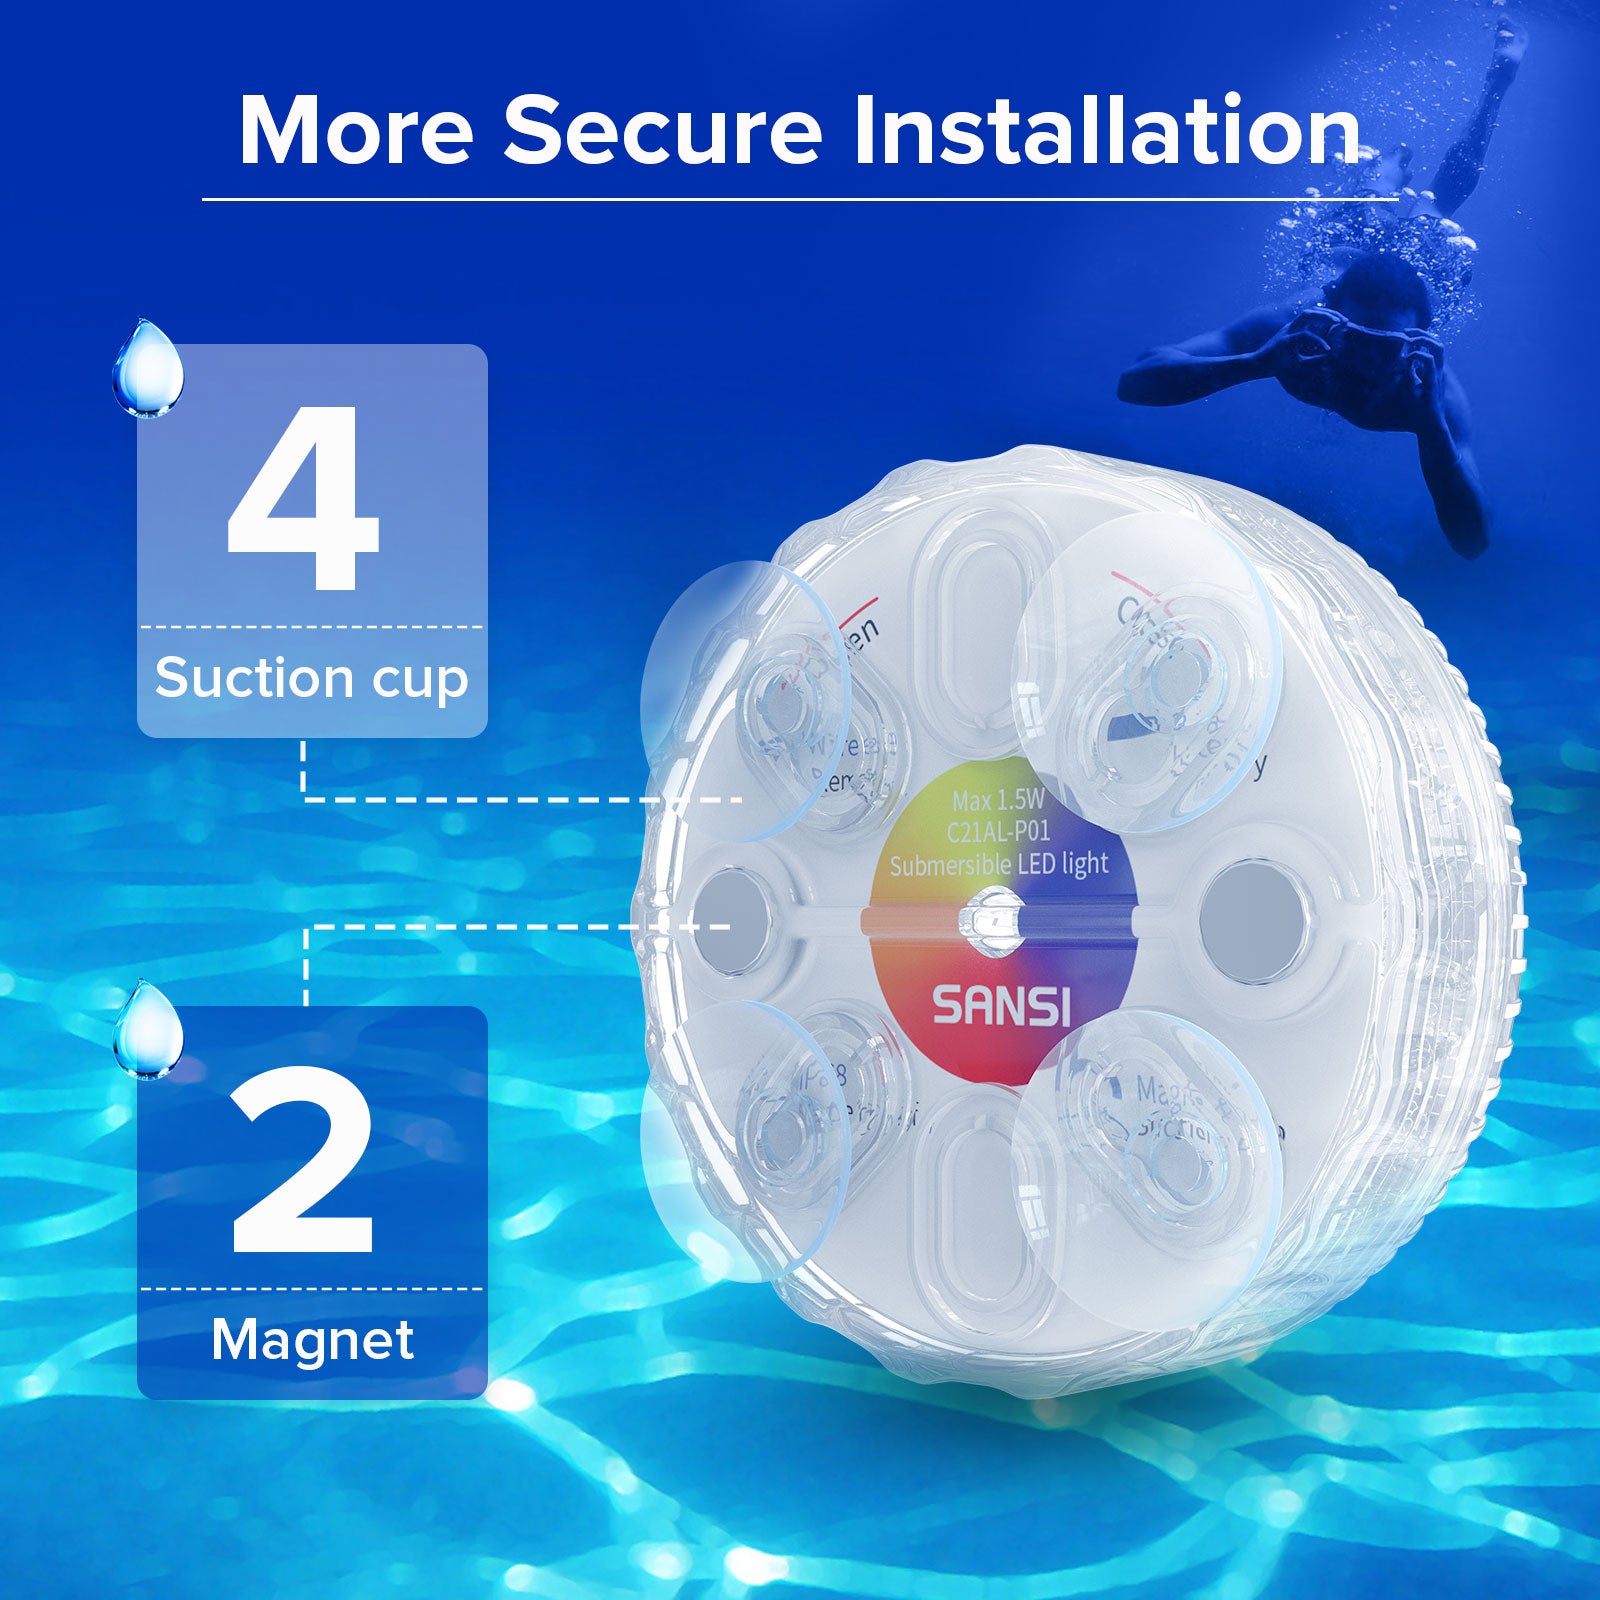 RGB LED Submersible Pool Light (US ONLY) has more secure installation，4 suction cup and 2 magnet.